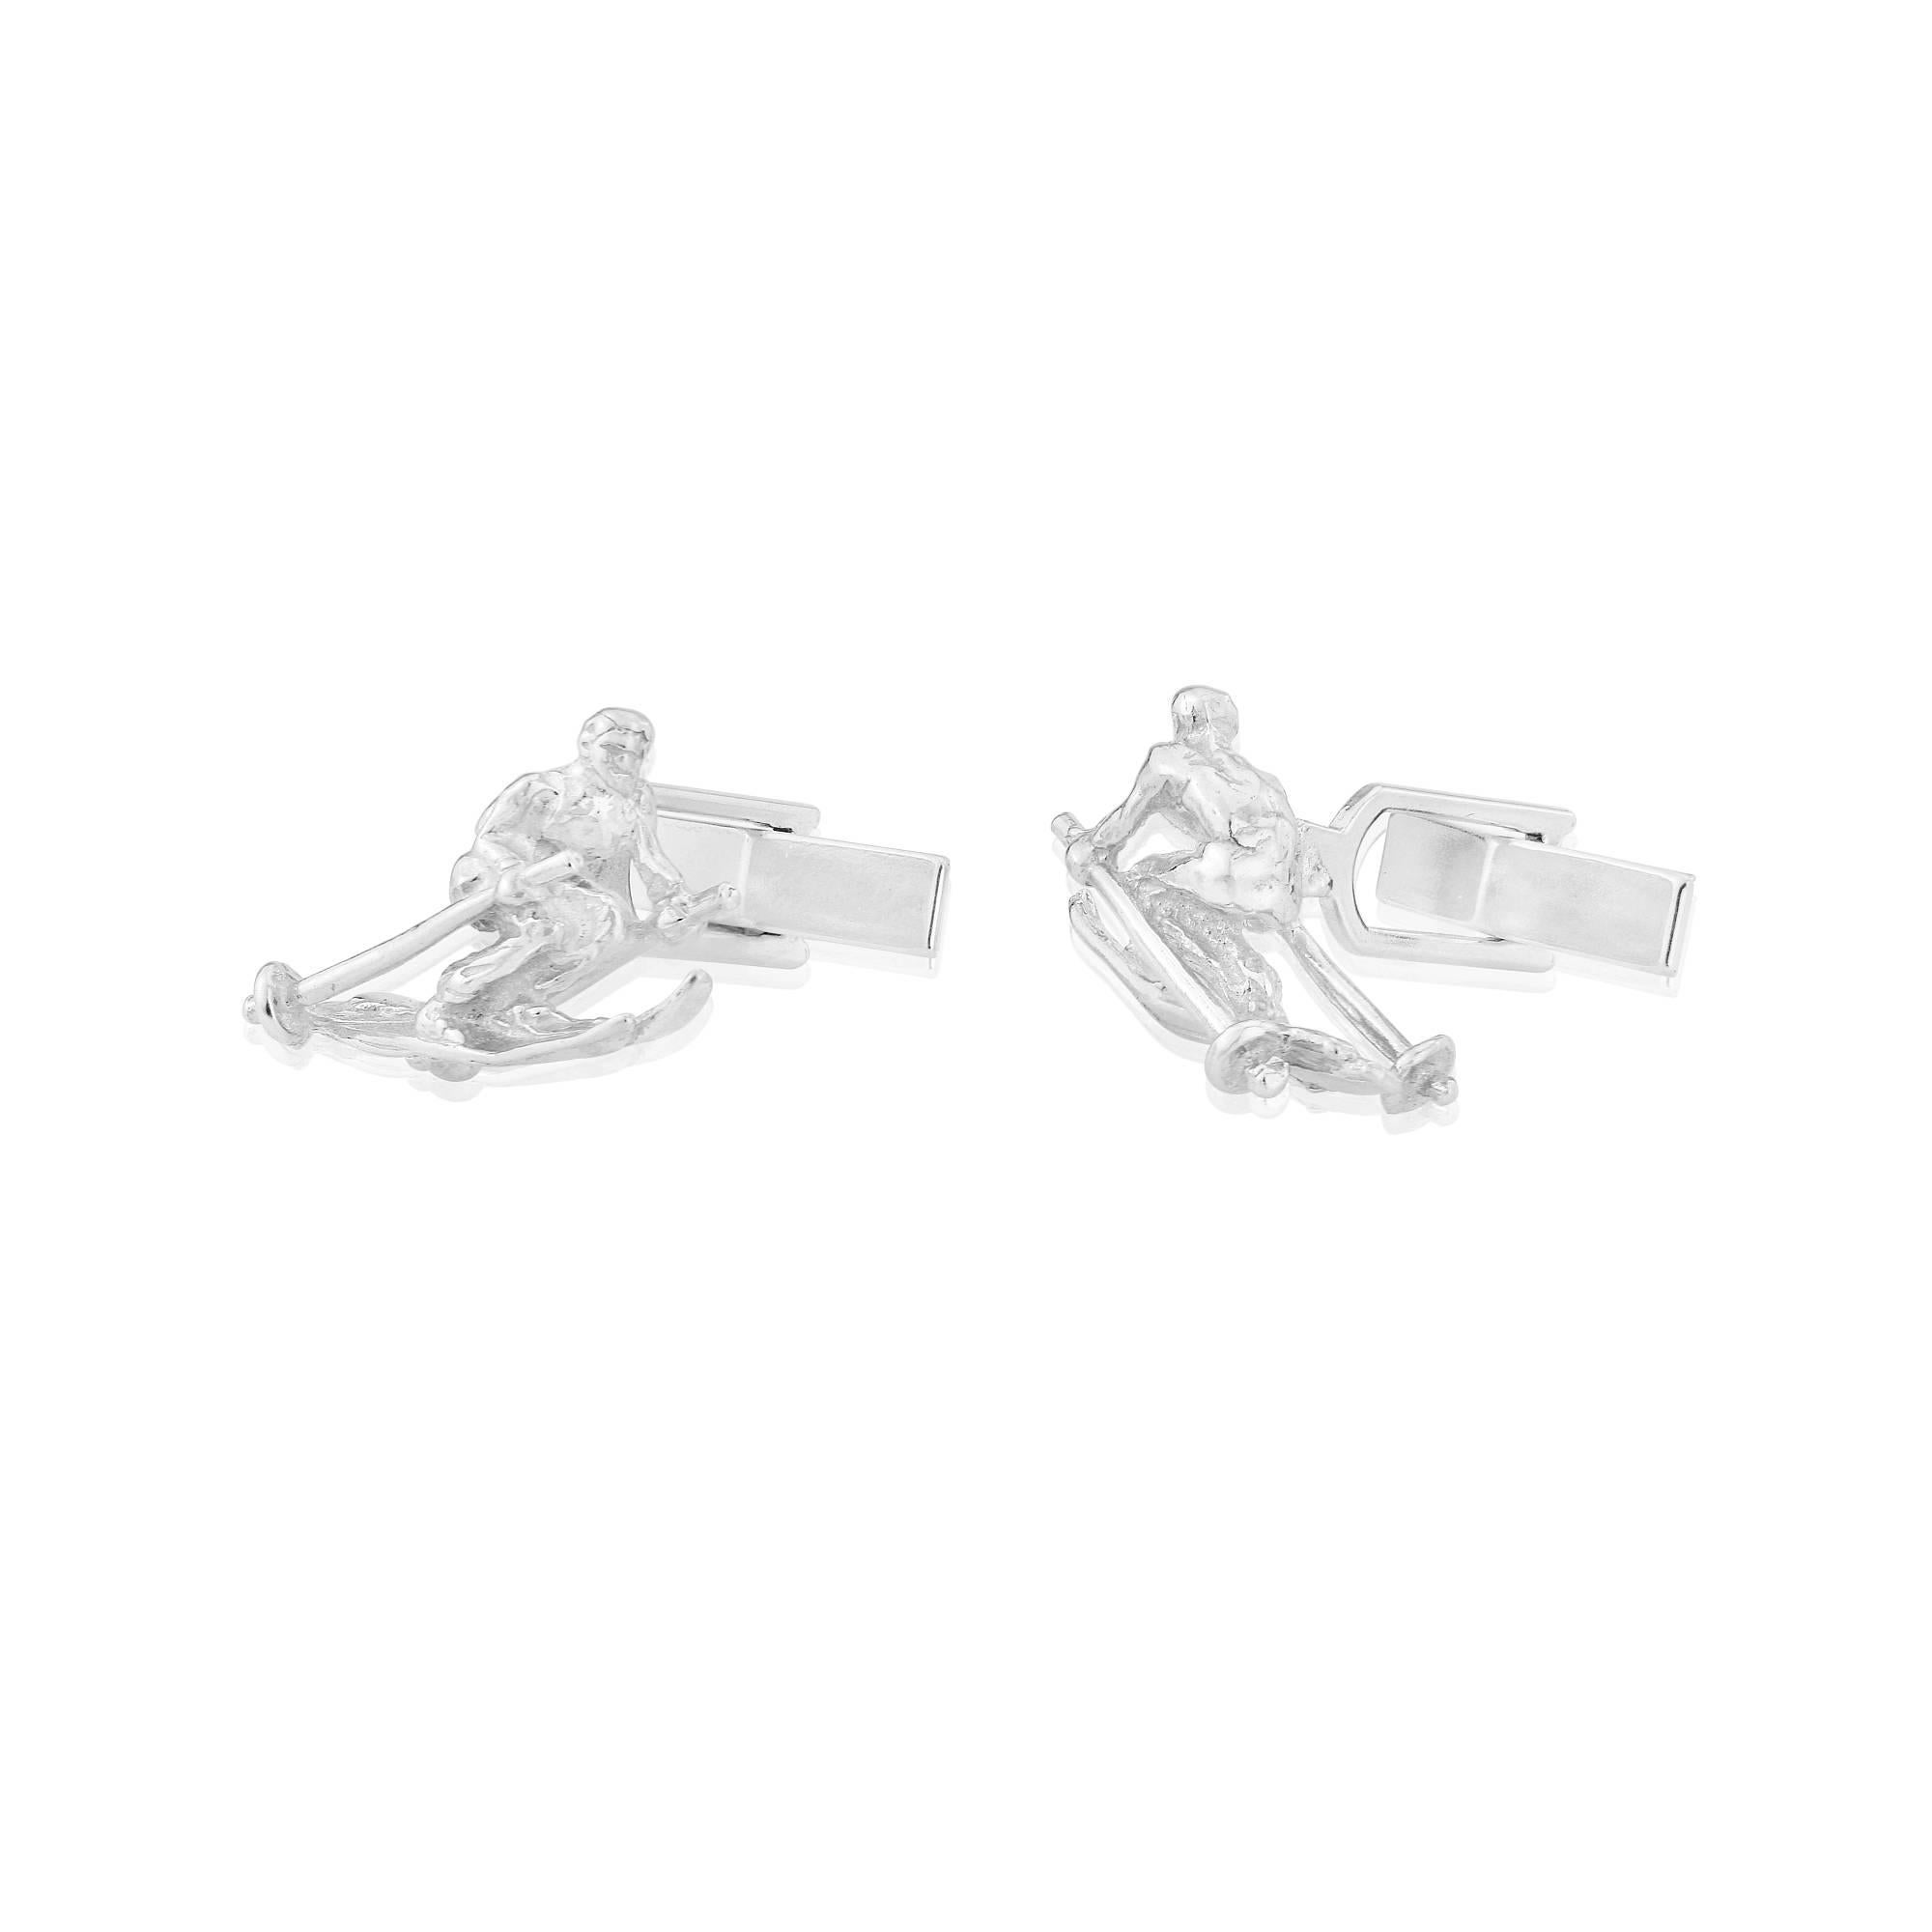 This highly realistic design catches the crouching movement of the Skiier.
Simon took a mould of a vintage charm to create this striking design.
The cufflinks are cast in solid sterling silver soldered as a left and right and sit beautifully on the